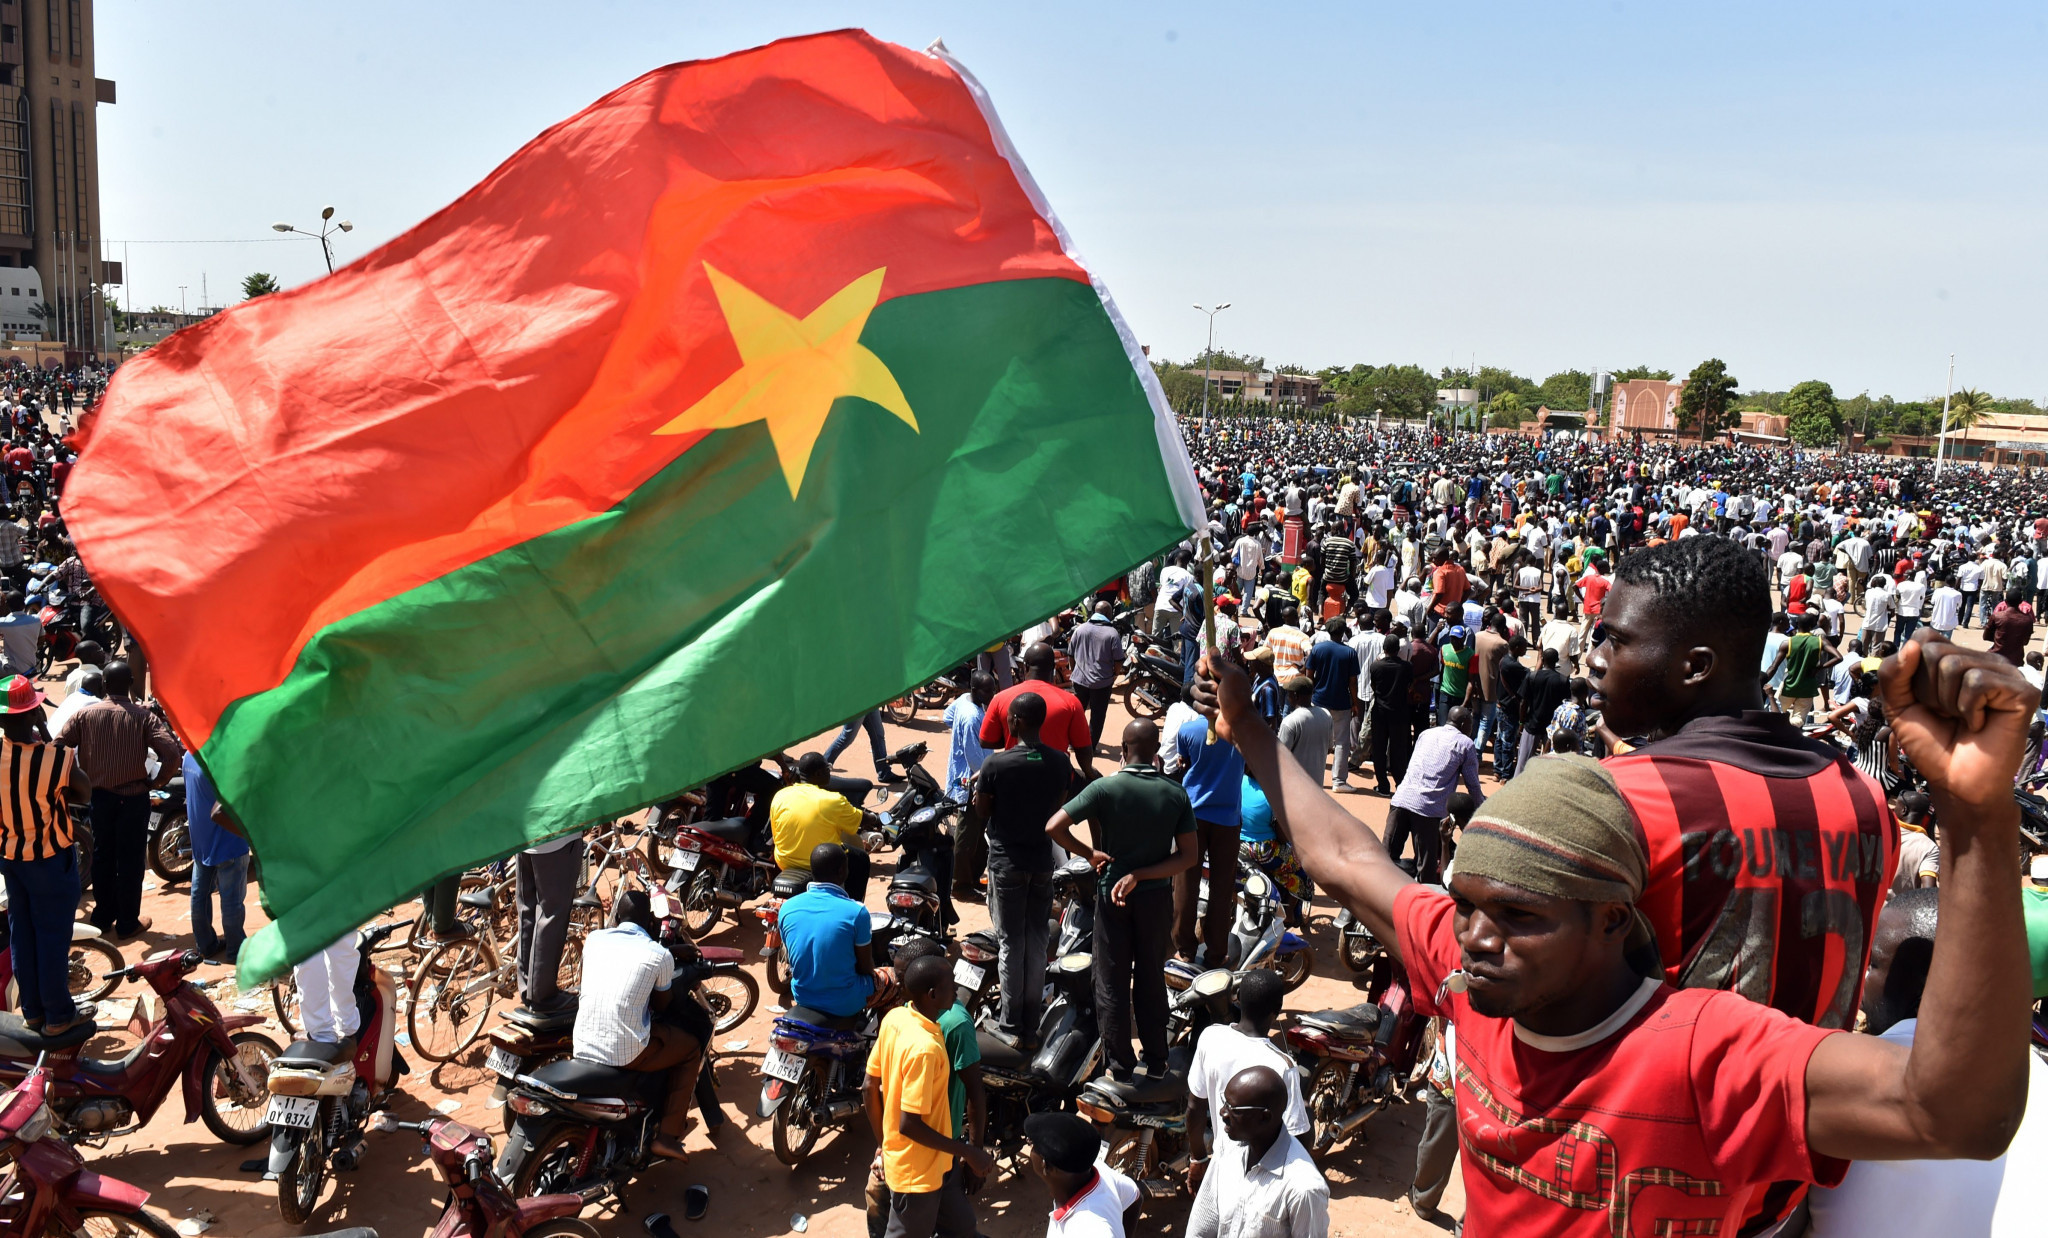 Burkina Faso is a contender to host the African Games in 2027 ©Getty Images